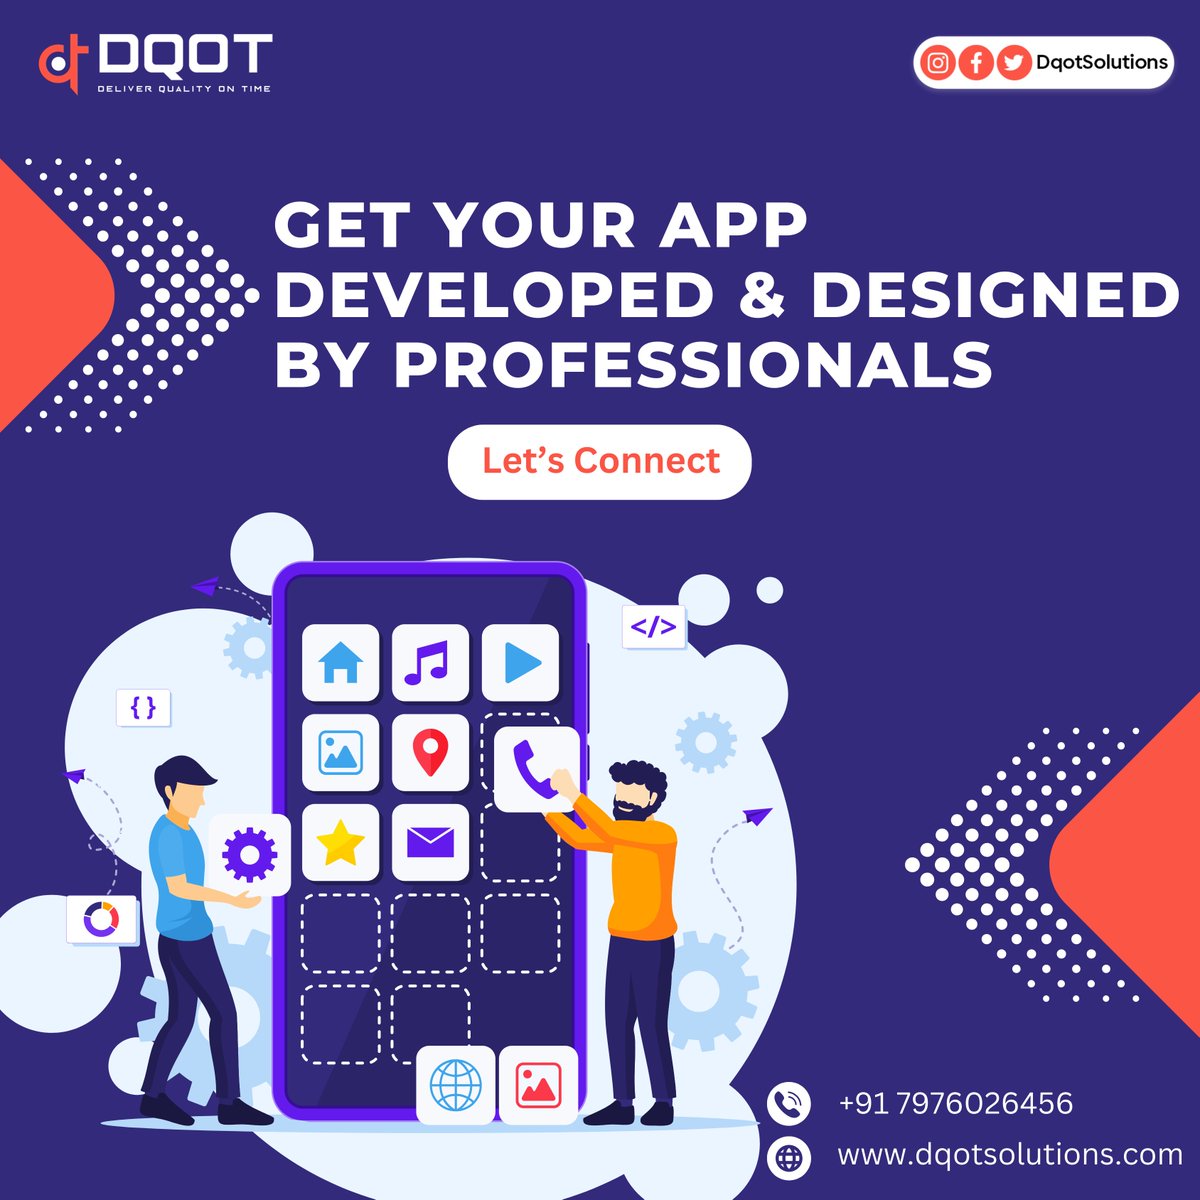 Step into the digital spotlight! Our experts are here to create the perfect app for your business💼

#DigitalDominance #AppDevelopmentPros #hireappdeveloper #mobileappdevelopment #dedicatedteam #digitalbusiness #Enterprenuer #DQOTsolutions #digitalsucess